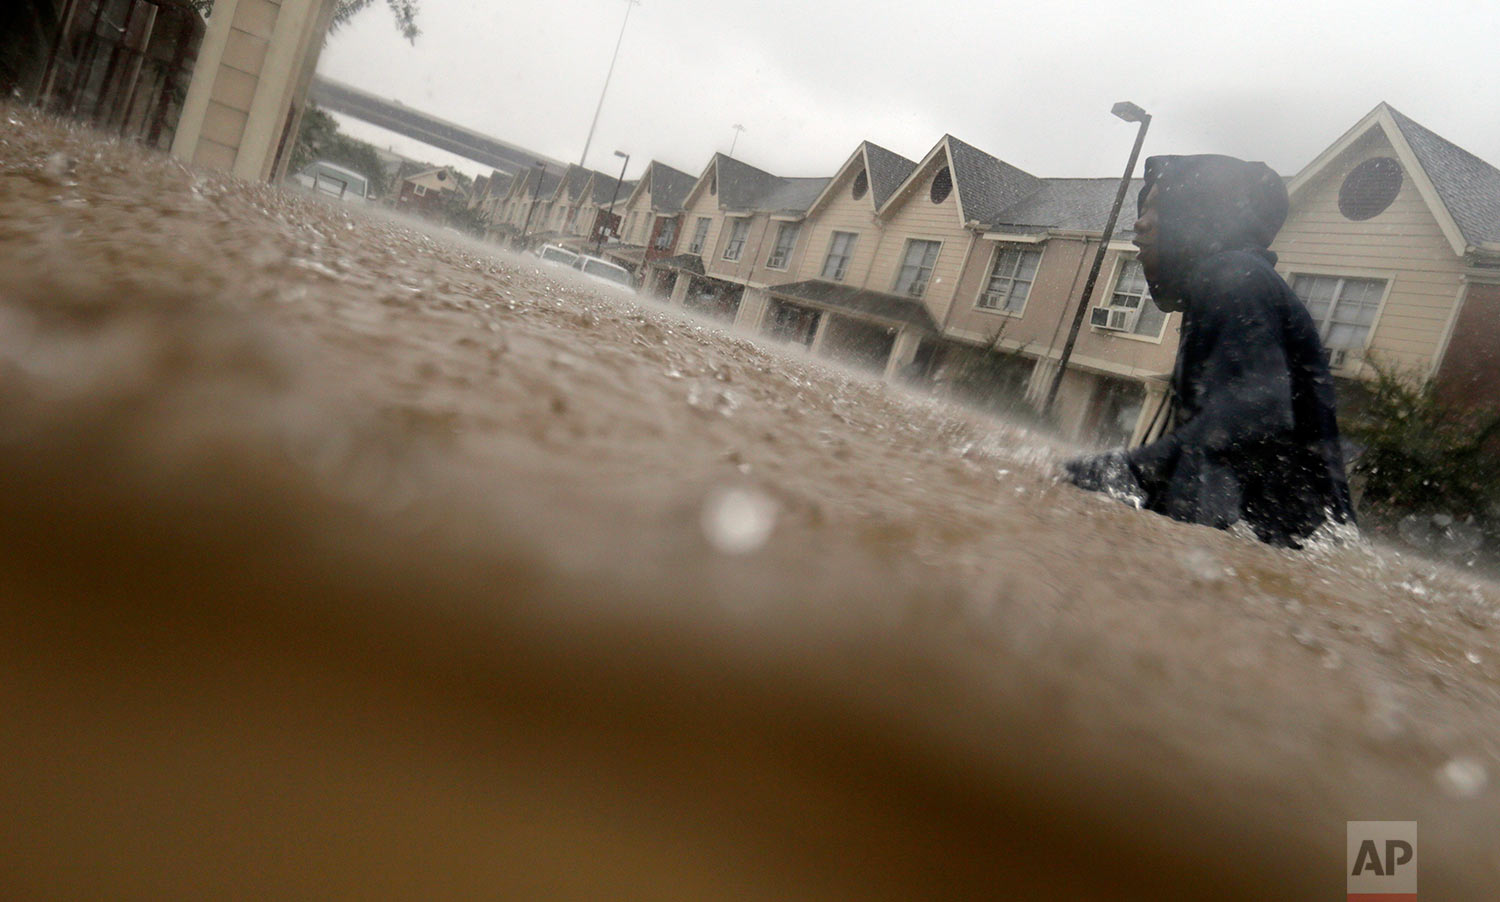 A child makes his way through floodwaters from Tropical Storm Harvey while checking on neighbors at his apartment complex in Houston, Sunday, Aug. 27, 2017. (AP Photo/LM Otero)